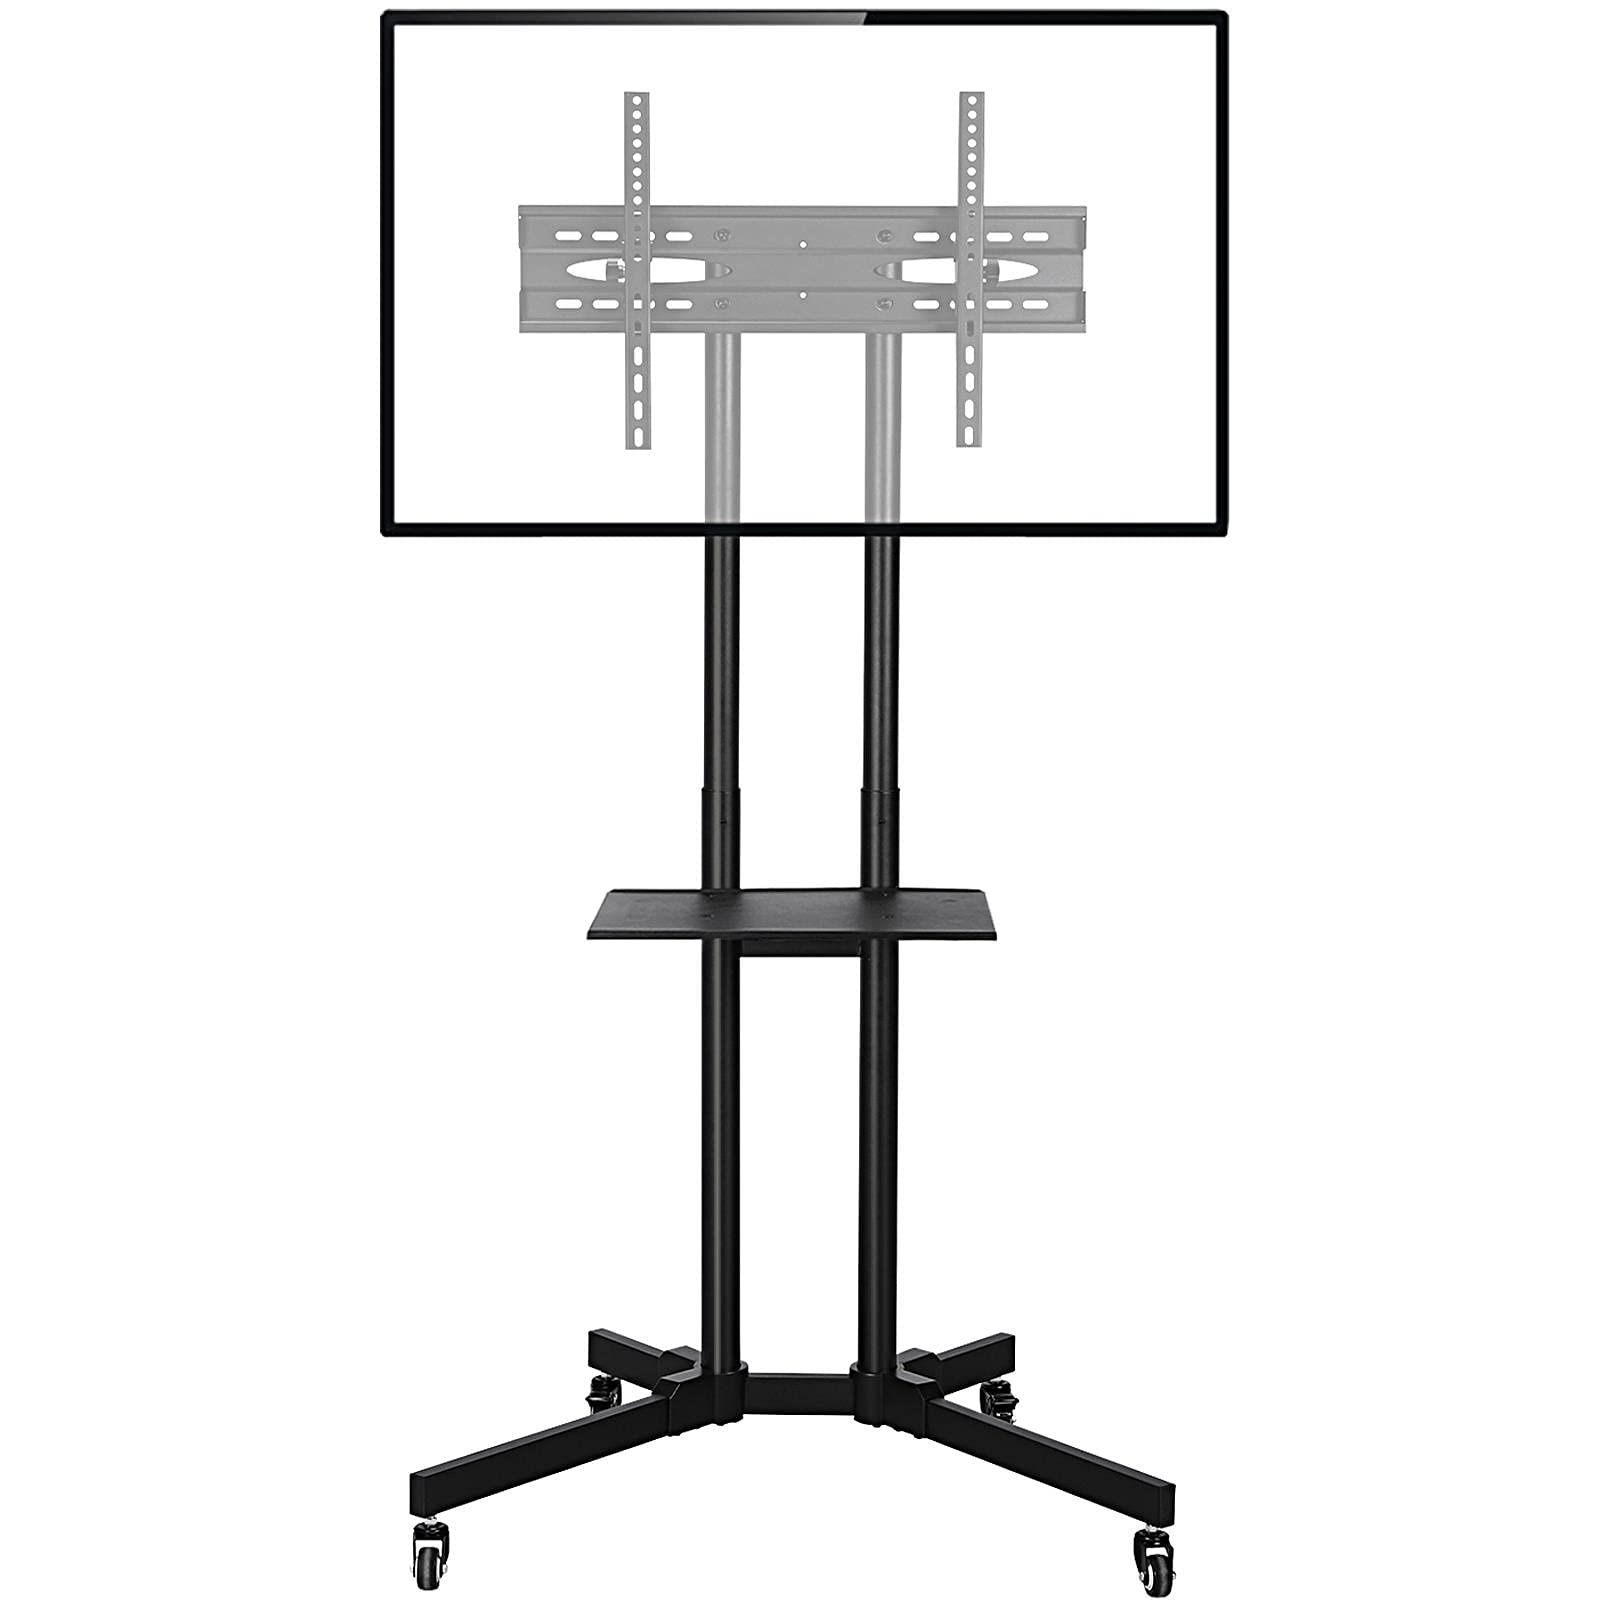 Buy Yaheetech Mobile Tv Stand On Wheels For 32” 75” Screens, Height Pertaining To Latest Foldable Portable Adjustable Tv Stands (View 13 of 15)